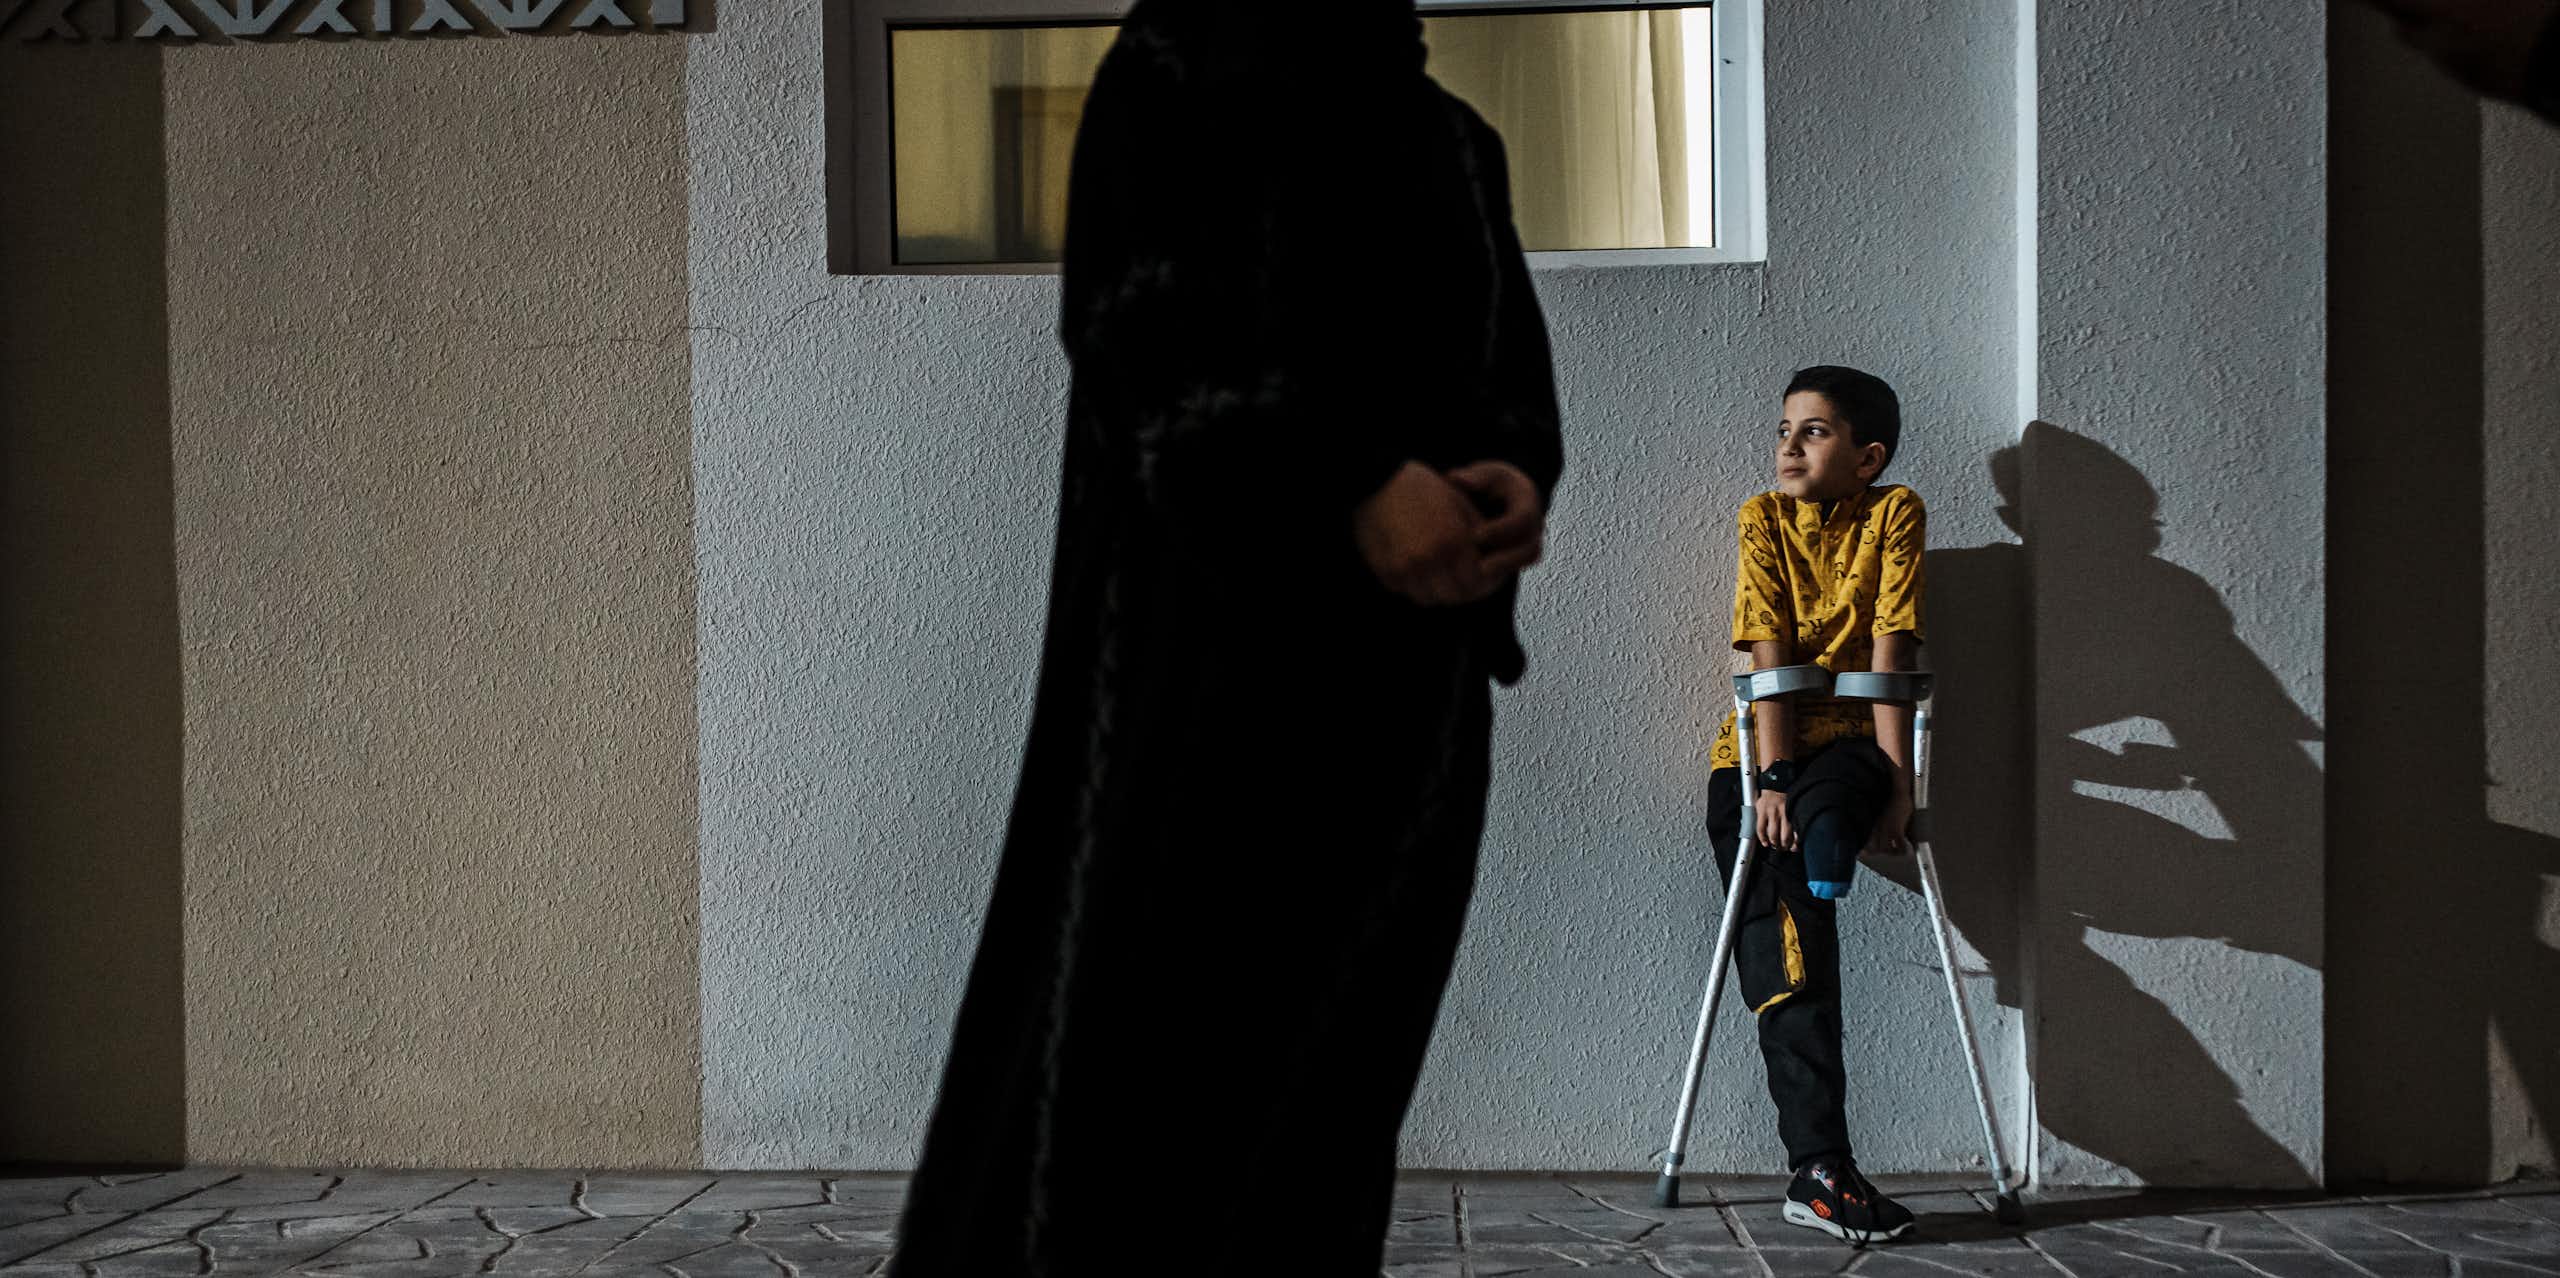 Young boy without a leg uses crutches as he leans against a wall. A faceless adult stands in the foreground.